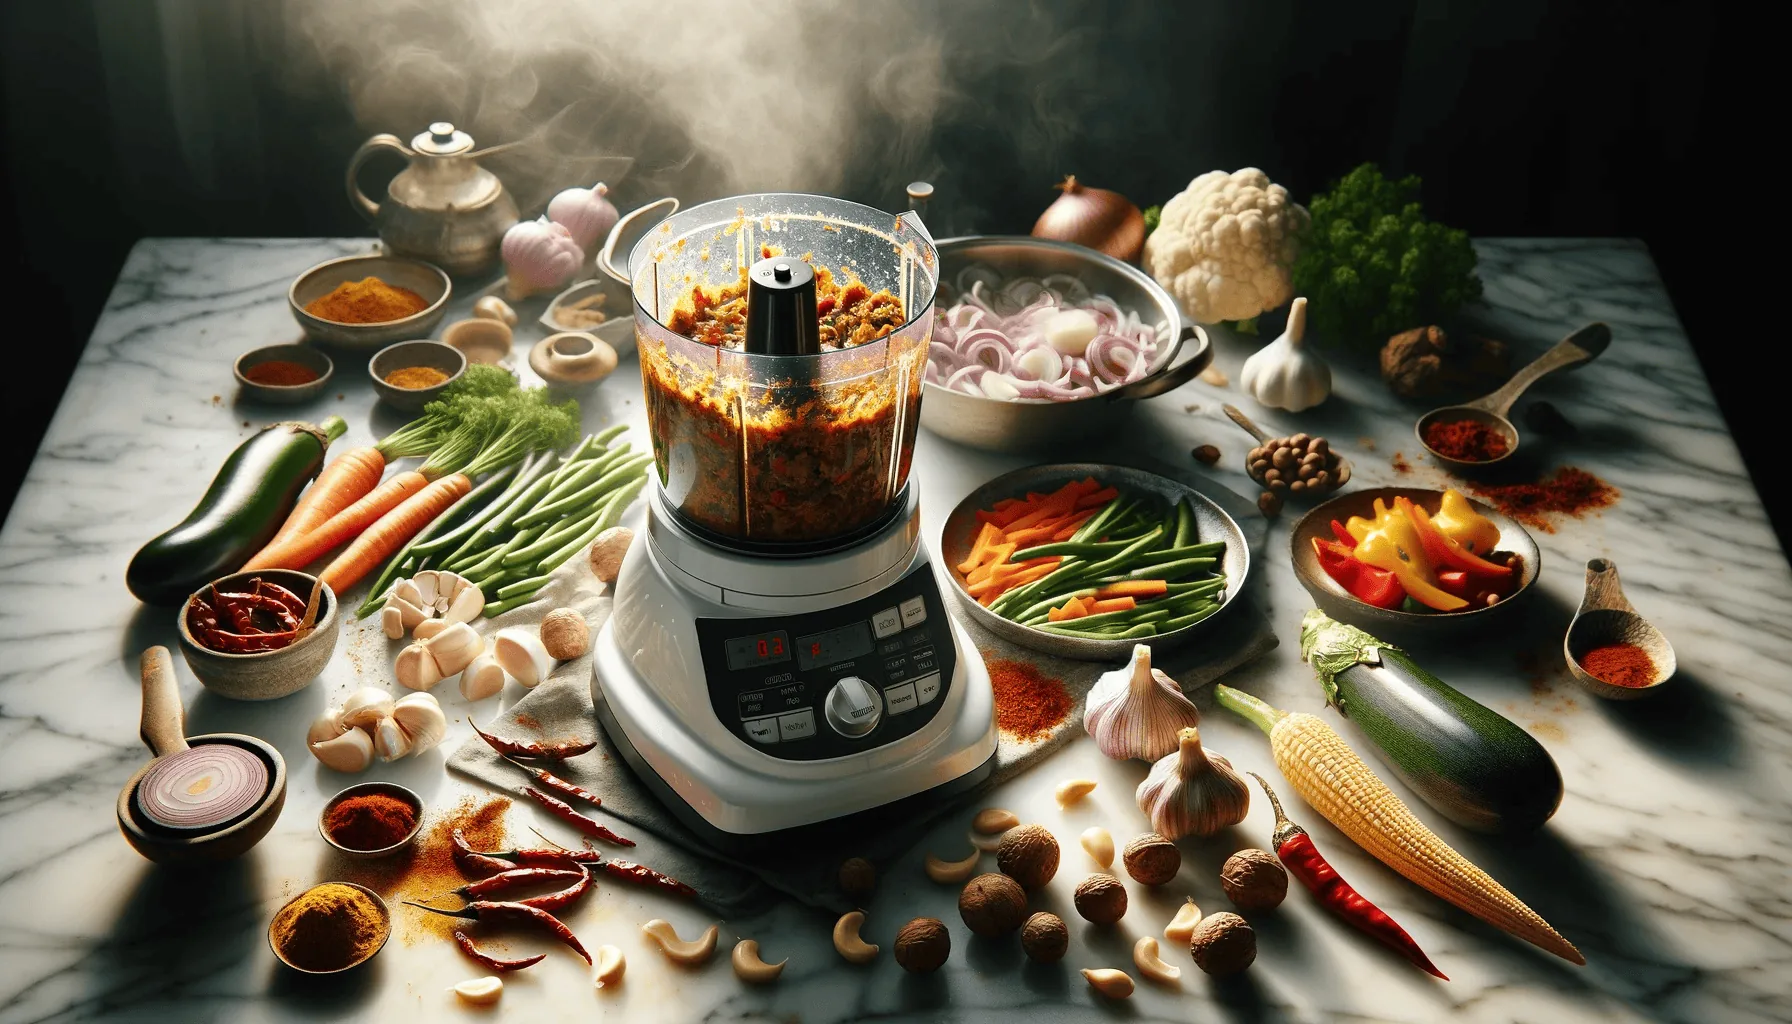 Midway cooking scene, with spices and vegetables being blended